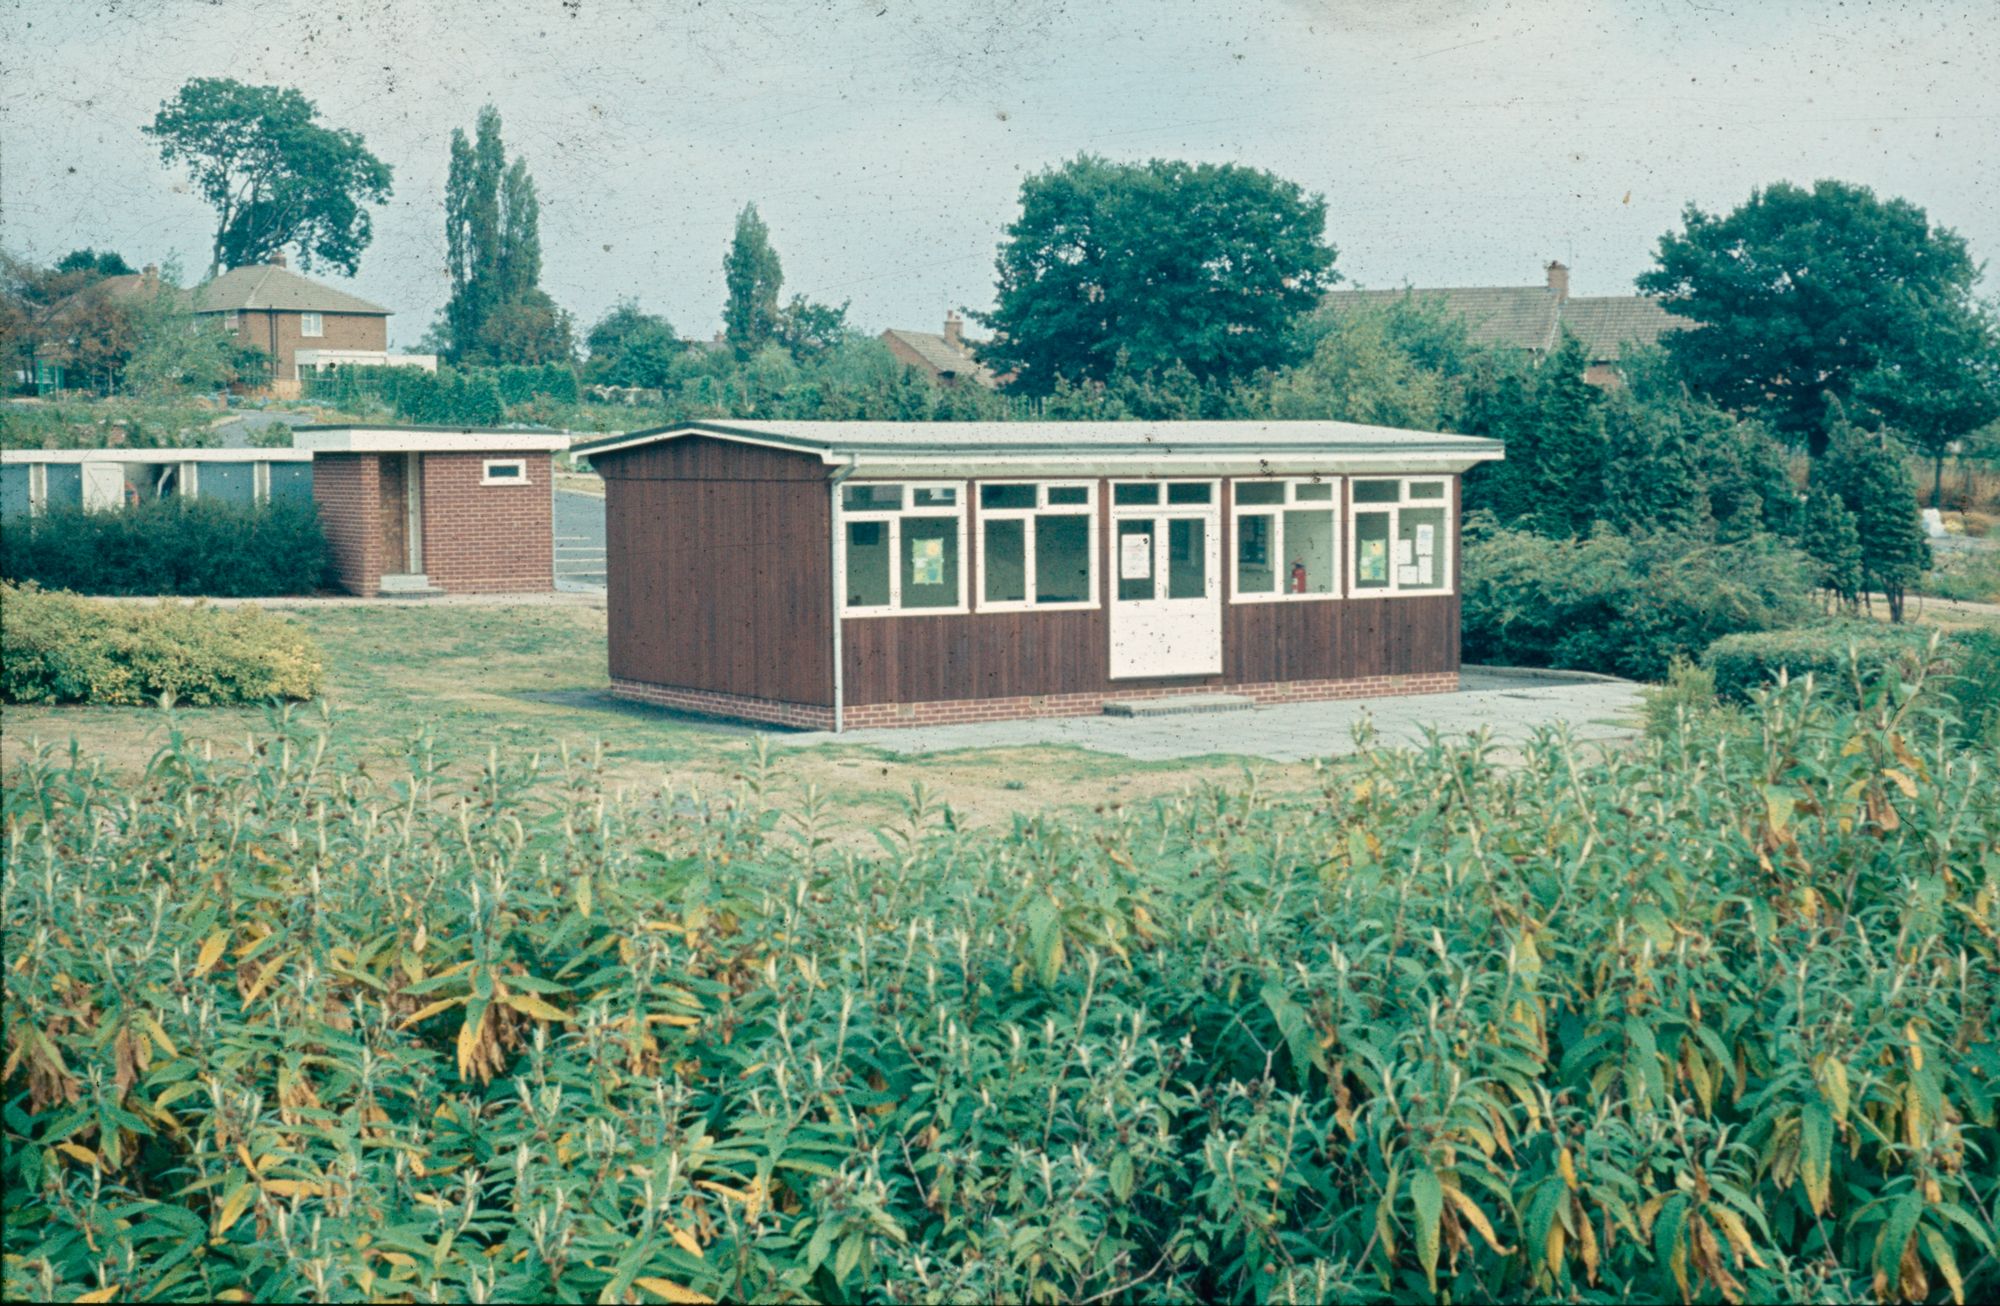 Allotments in Birmingham: history, policy and statistics – 1960s to the present day